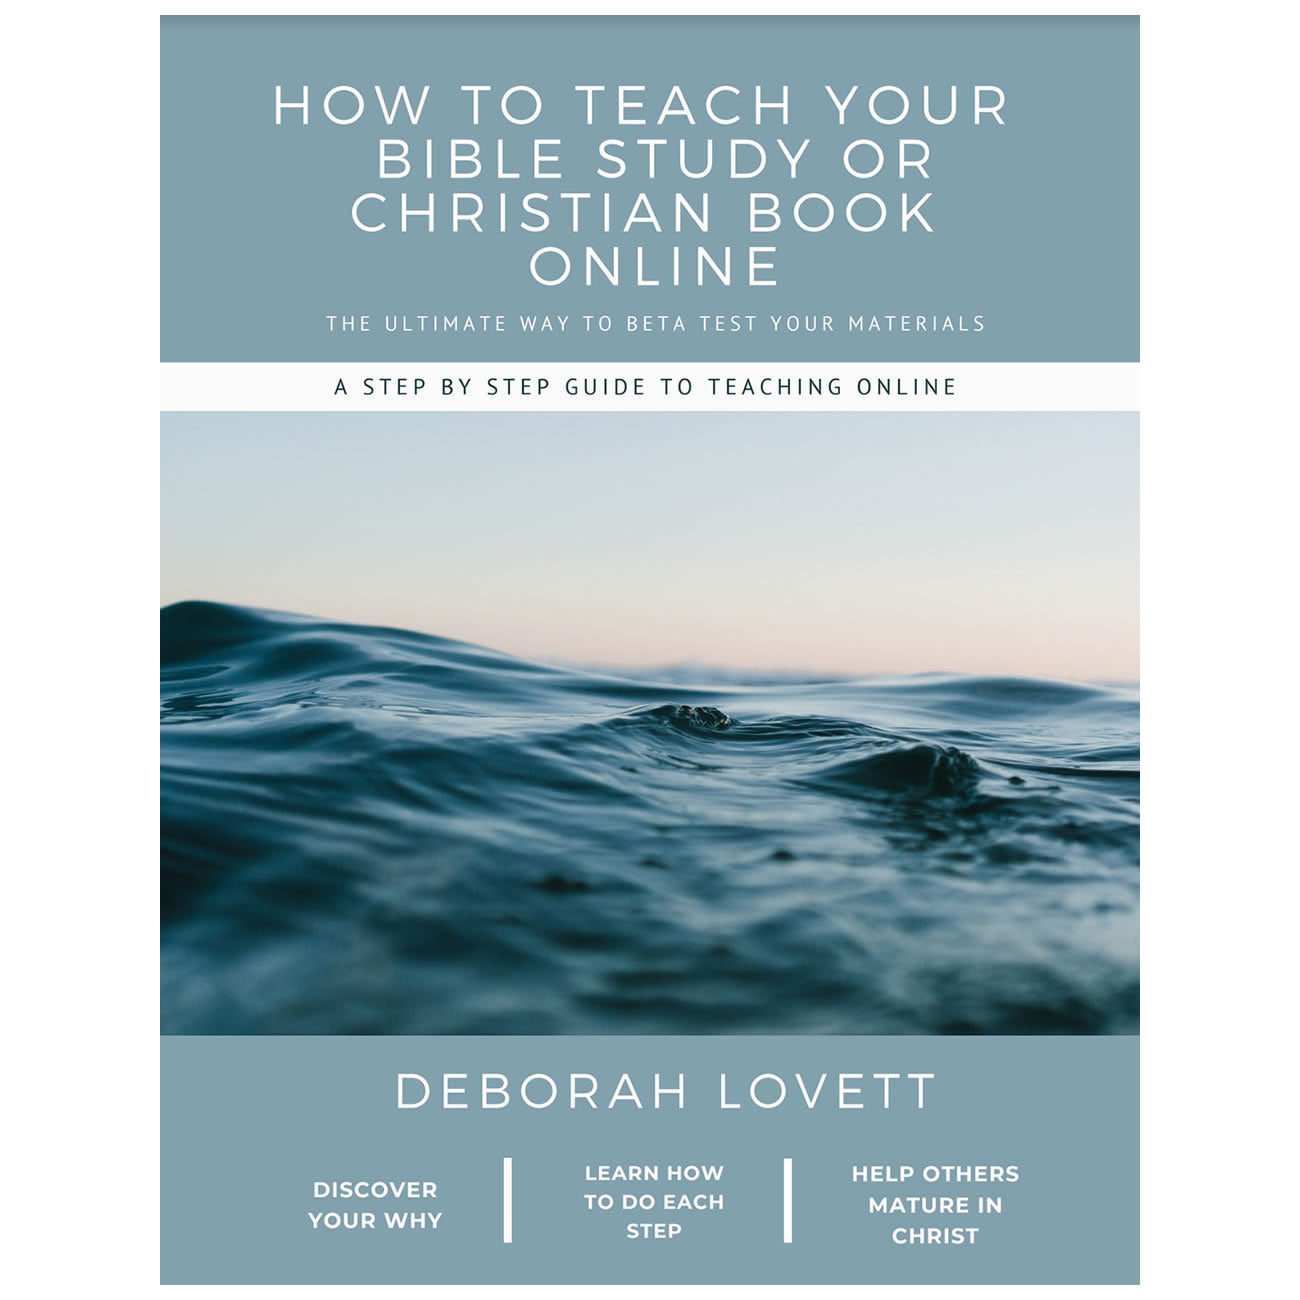 How to Teach Your Bible Study or Christian Book Online PDF Ebook